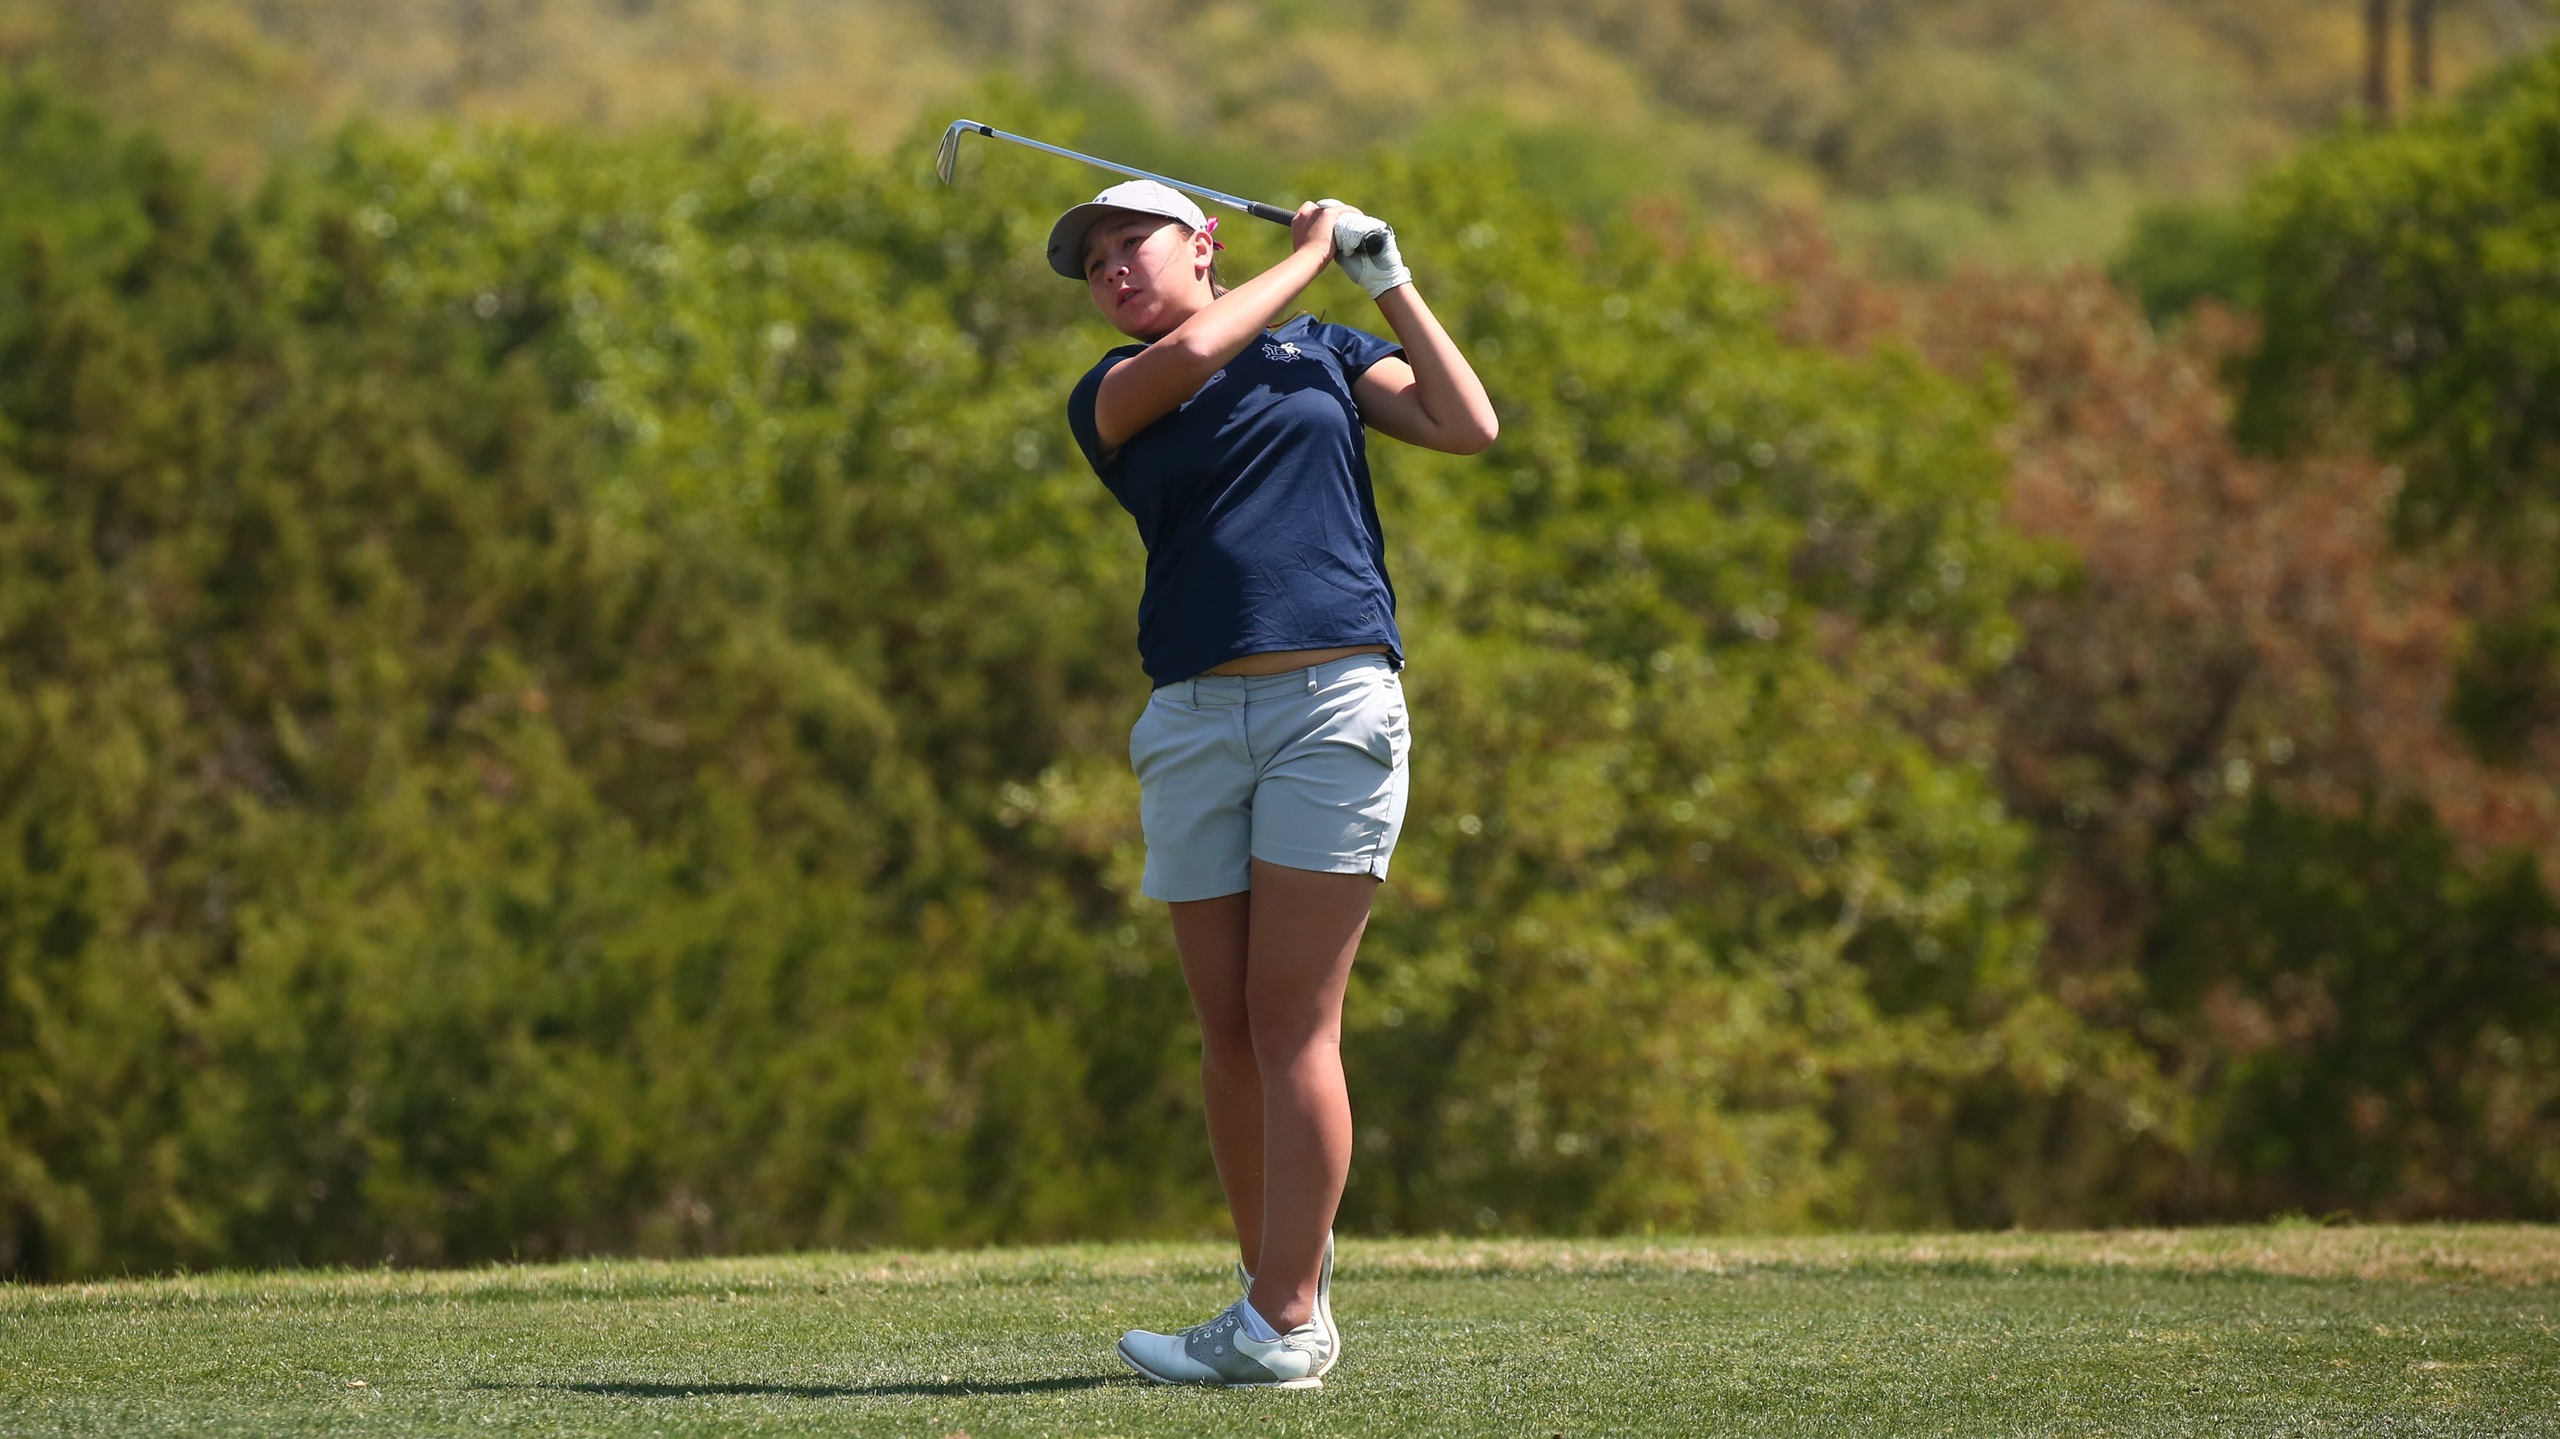 Burch Selected as SCAC Golfer of the Week, Her Second of the Season